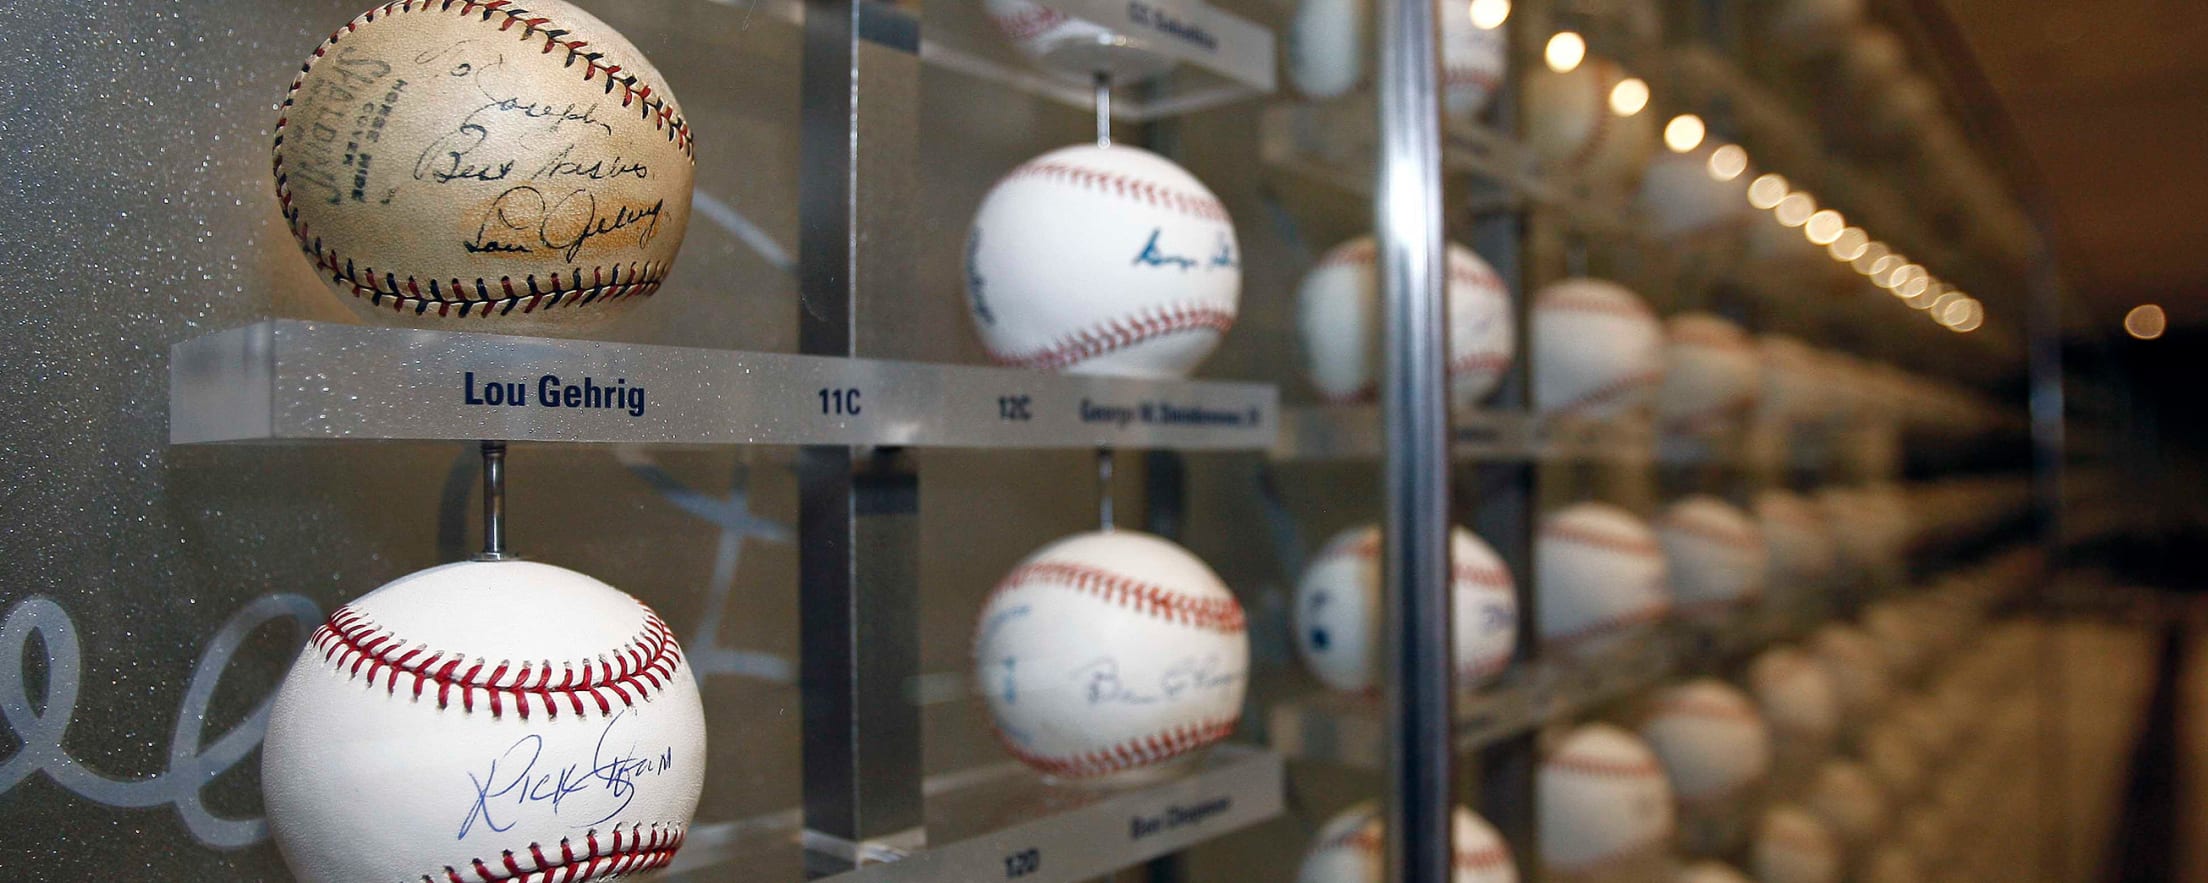 New York Yankees Museum presented by Bank of America - Permanent Exhibits